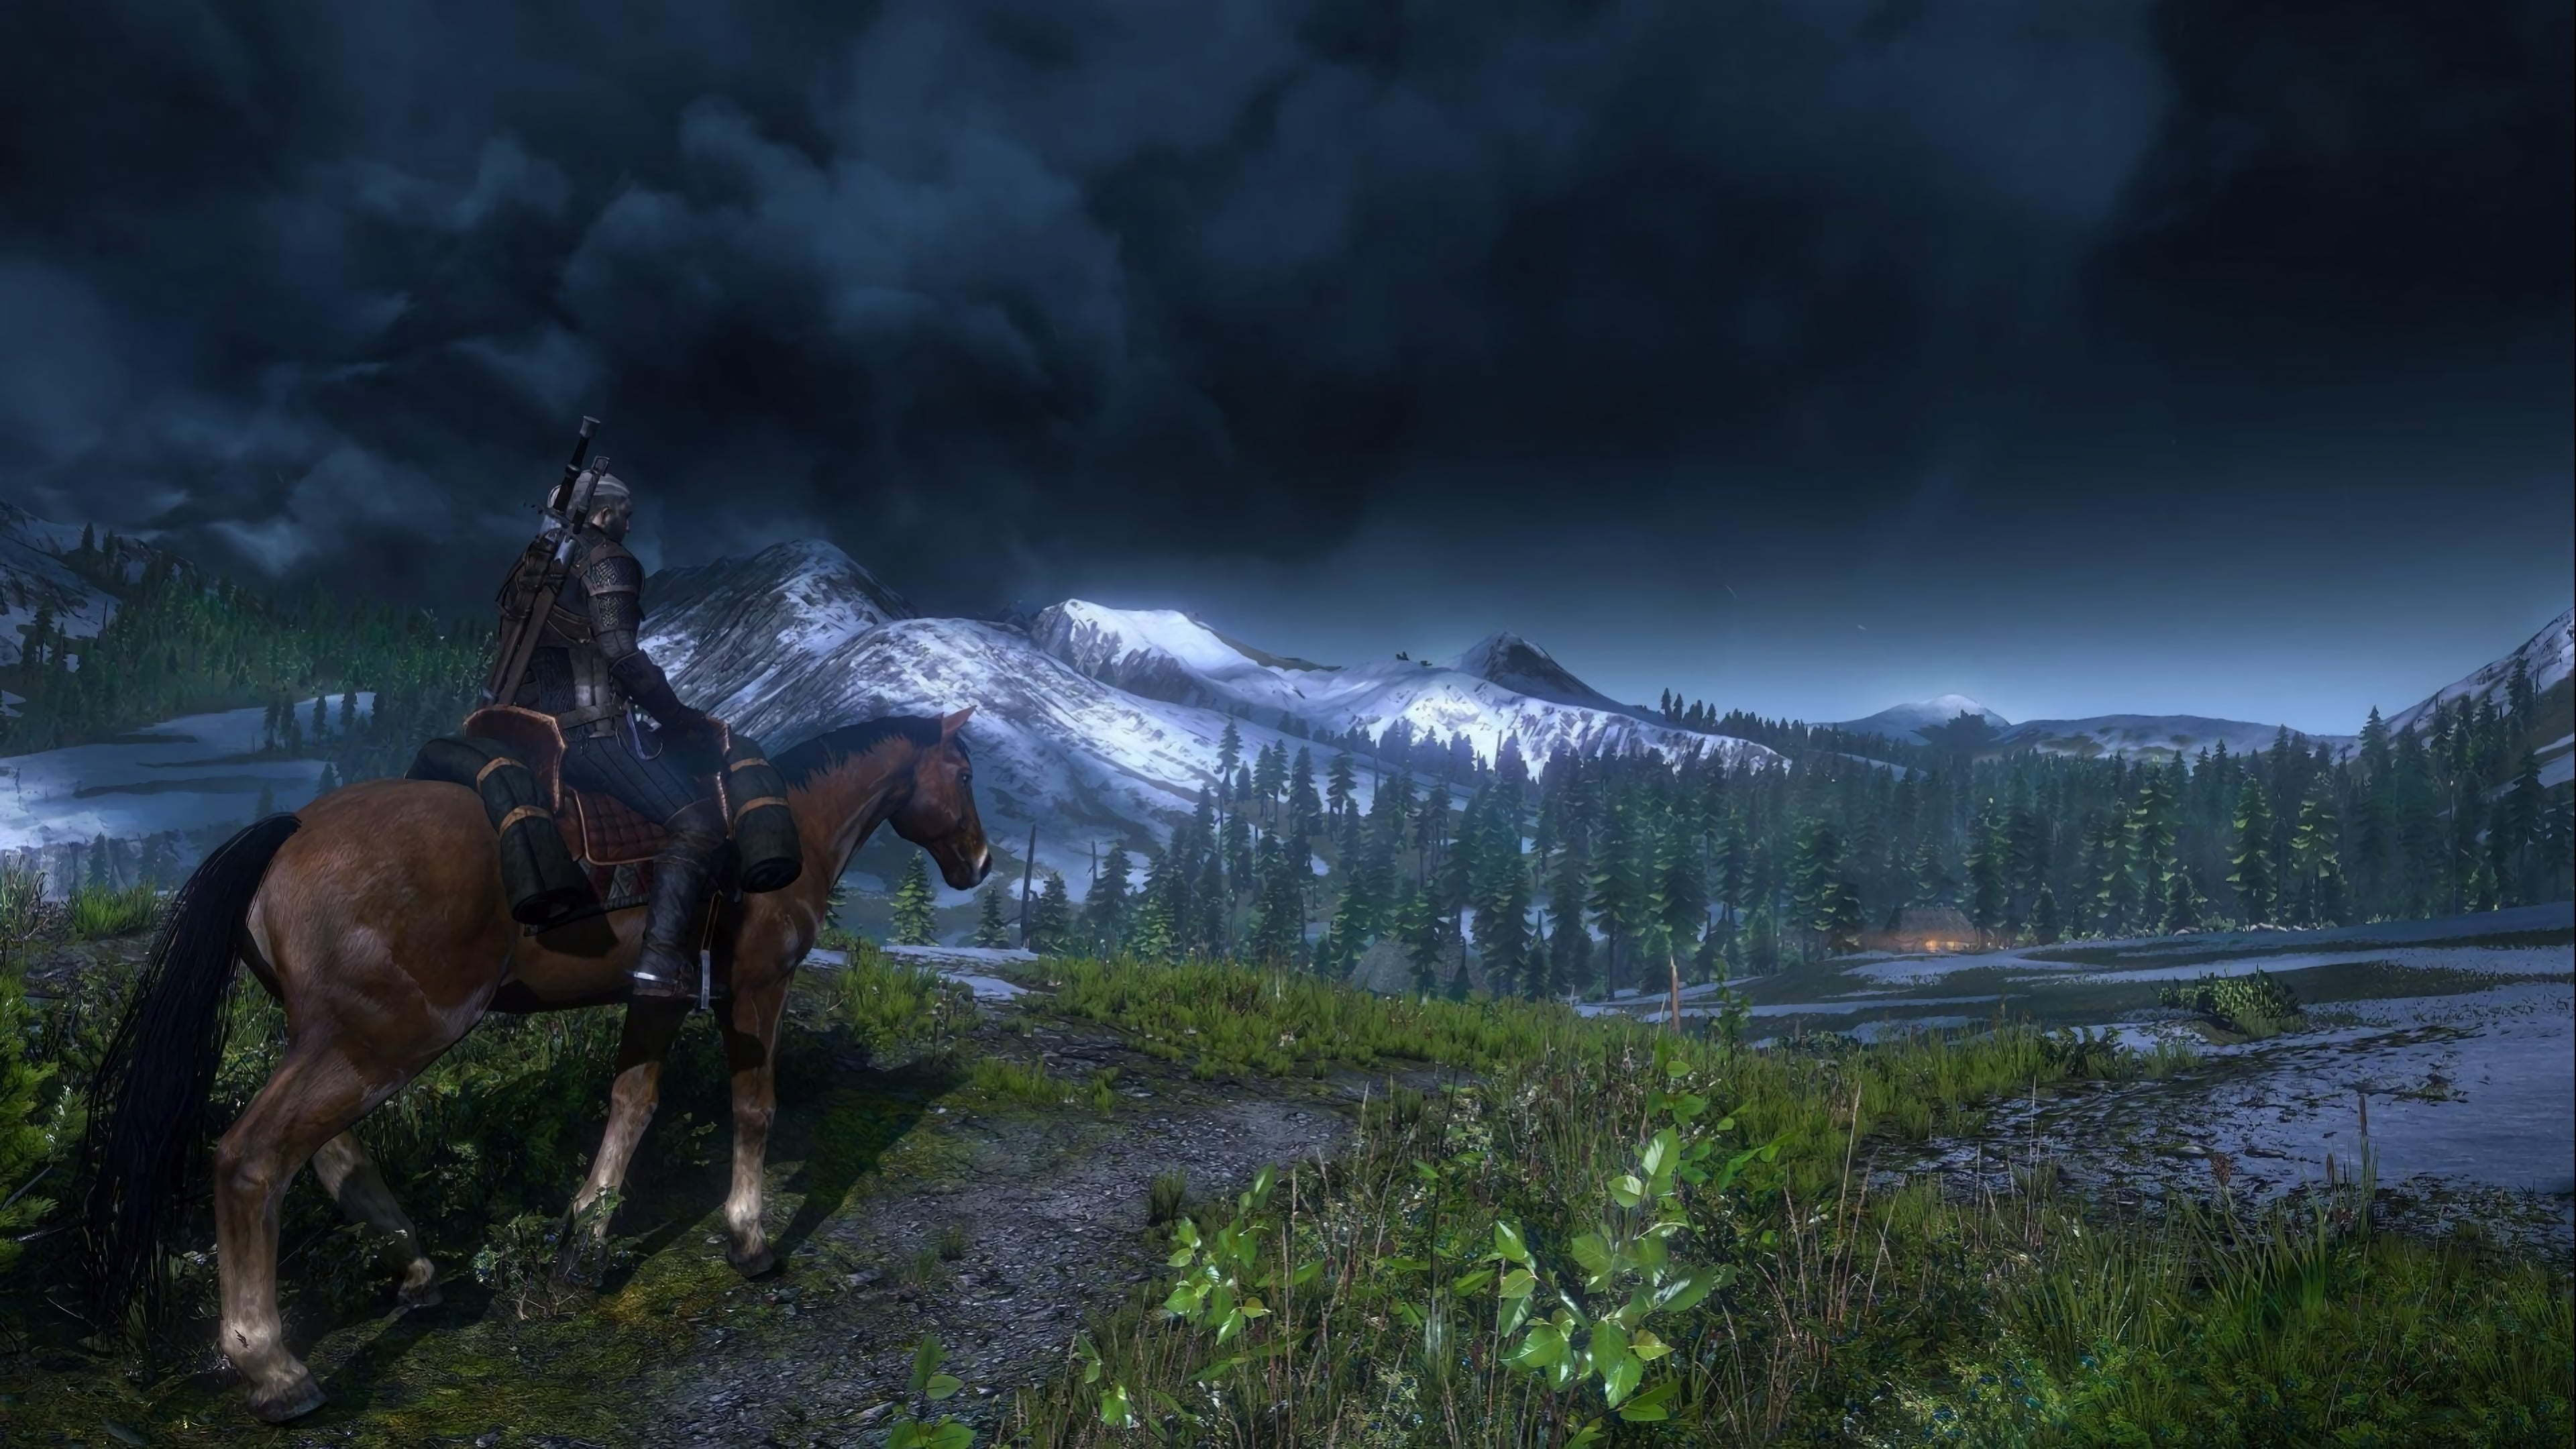 The Witcher 3: Wild Hunt, looking into the distance, mountain